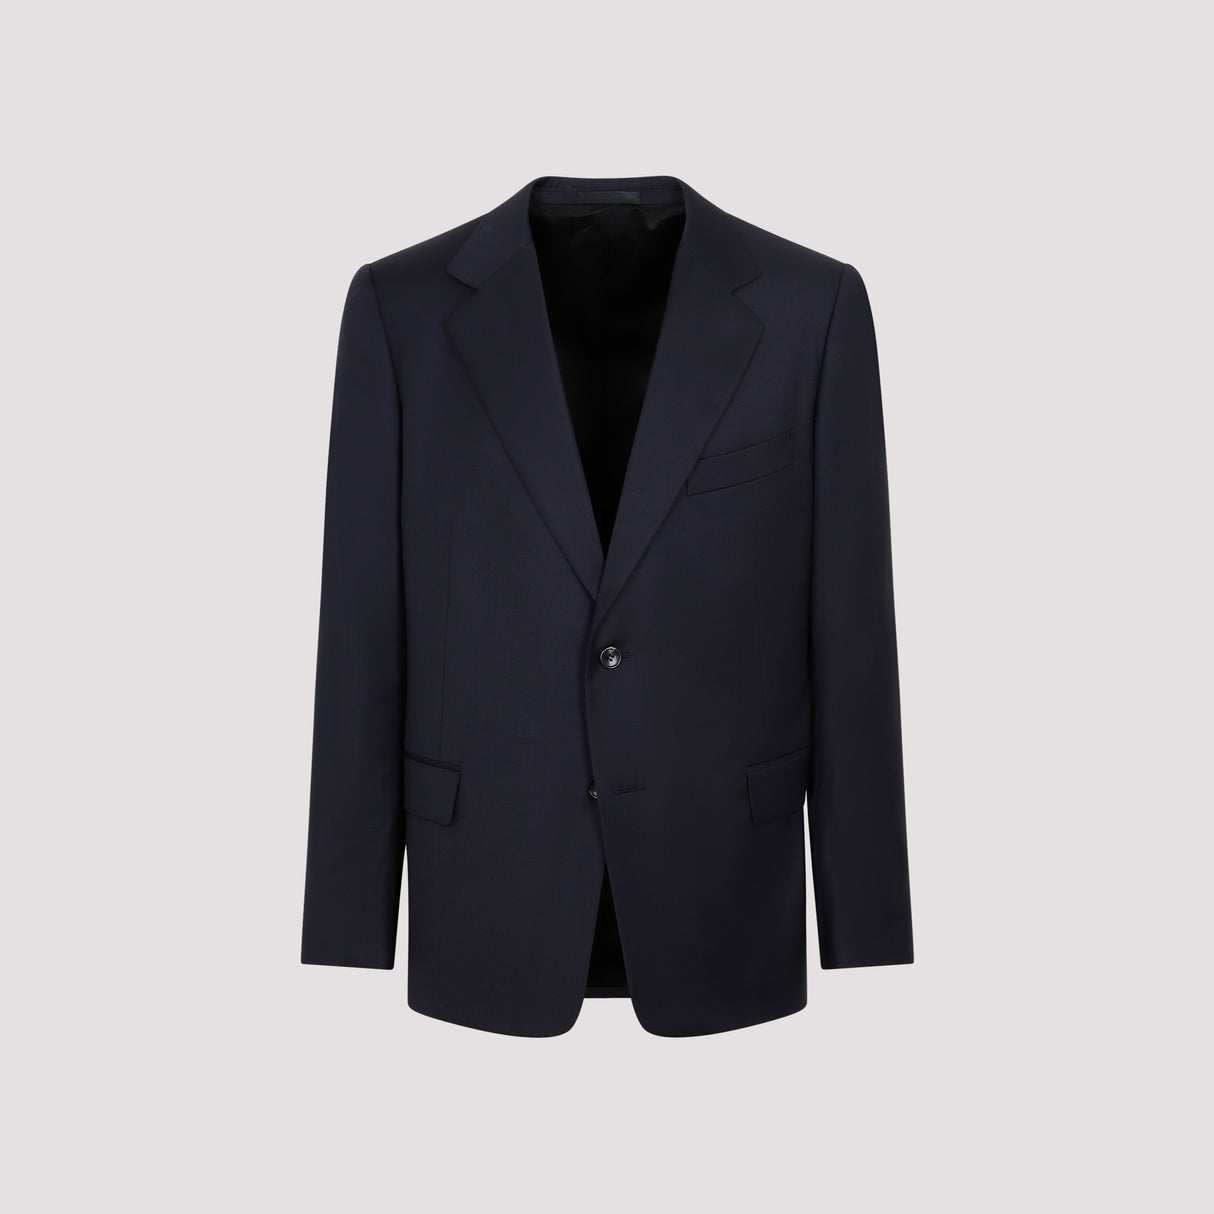 LANVIN Men's Blue Wool Jacket for SS23 Collection